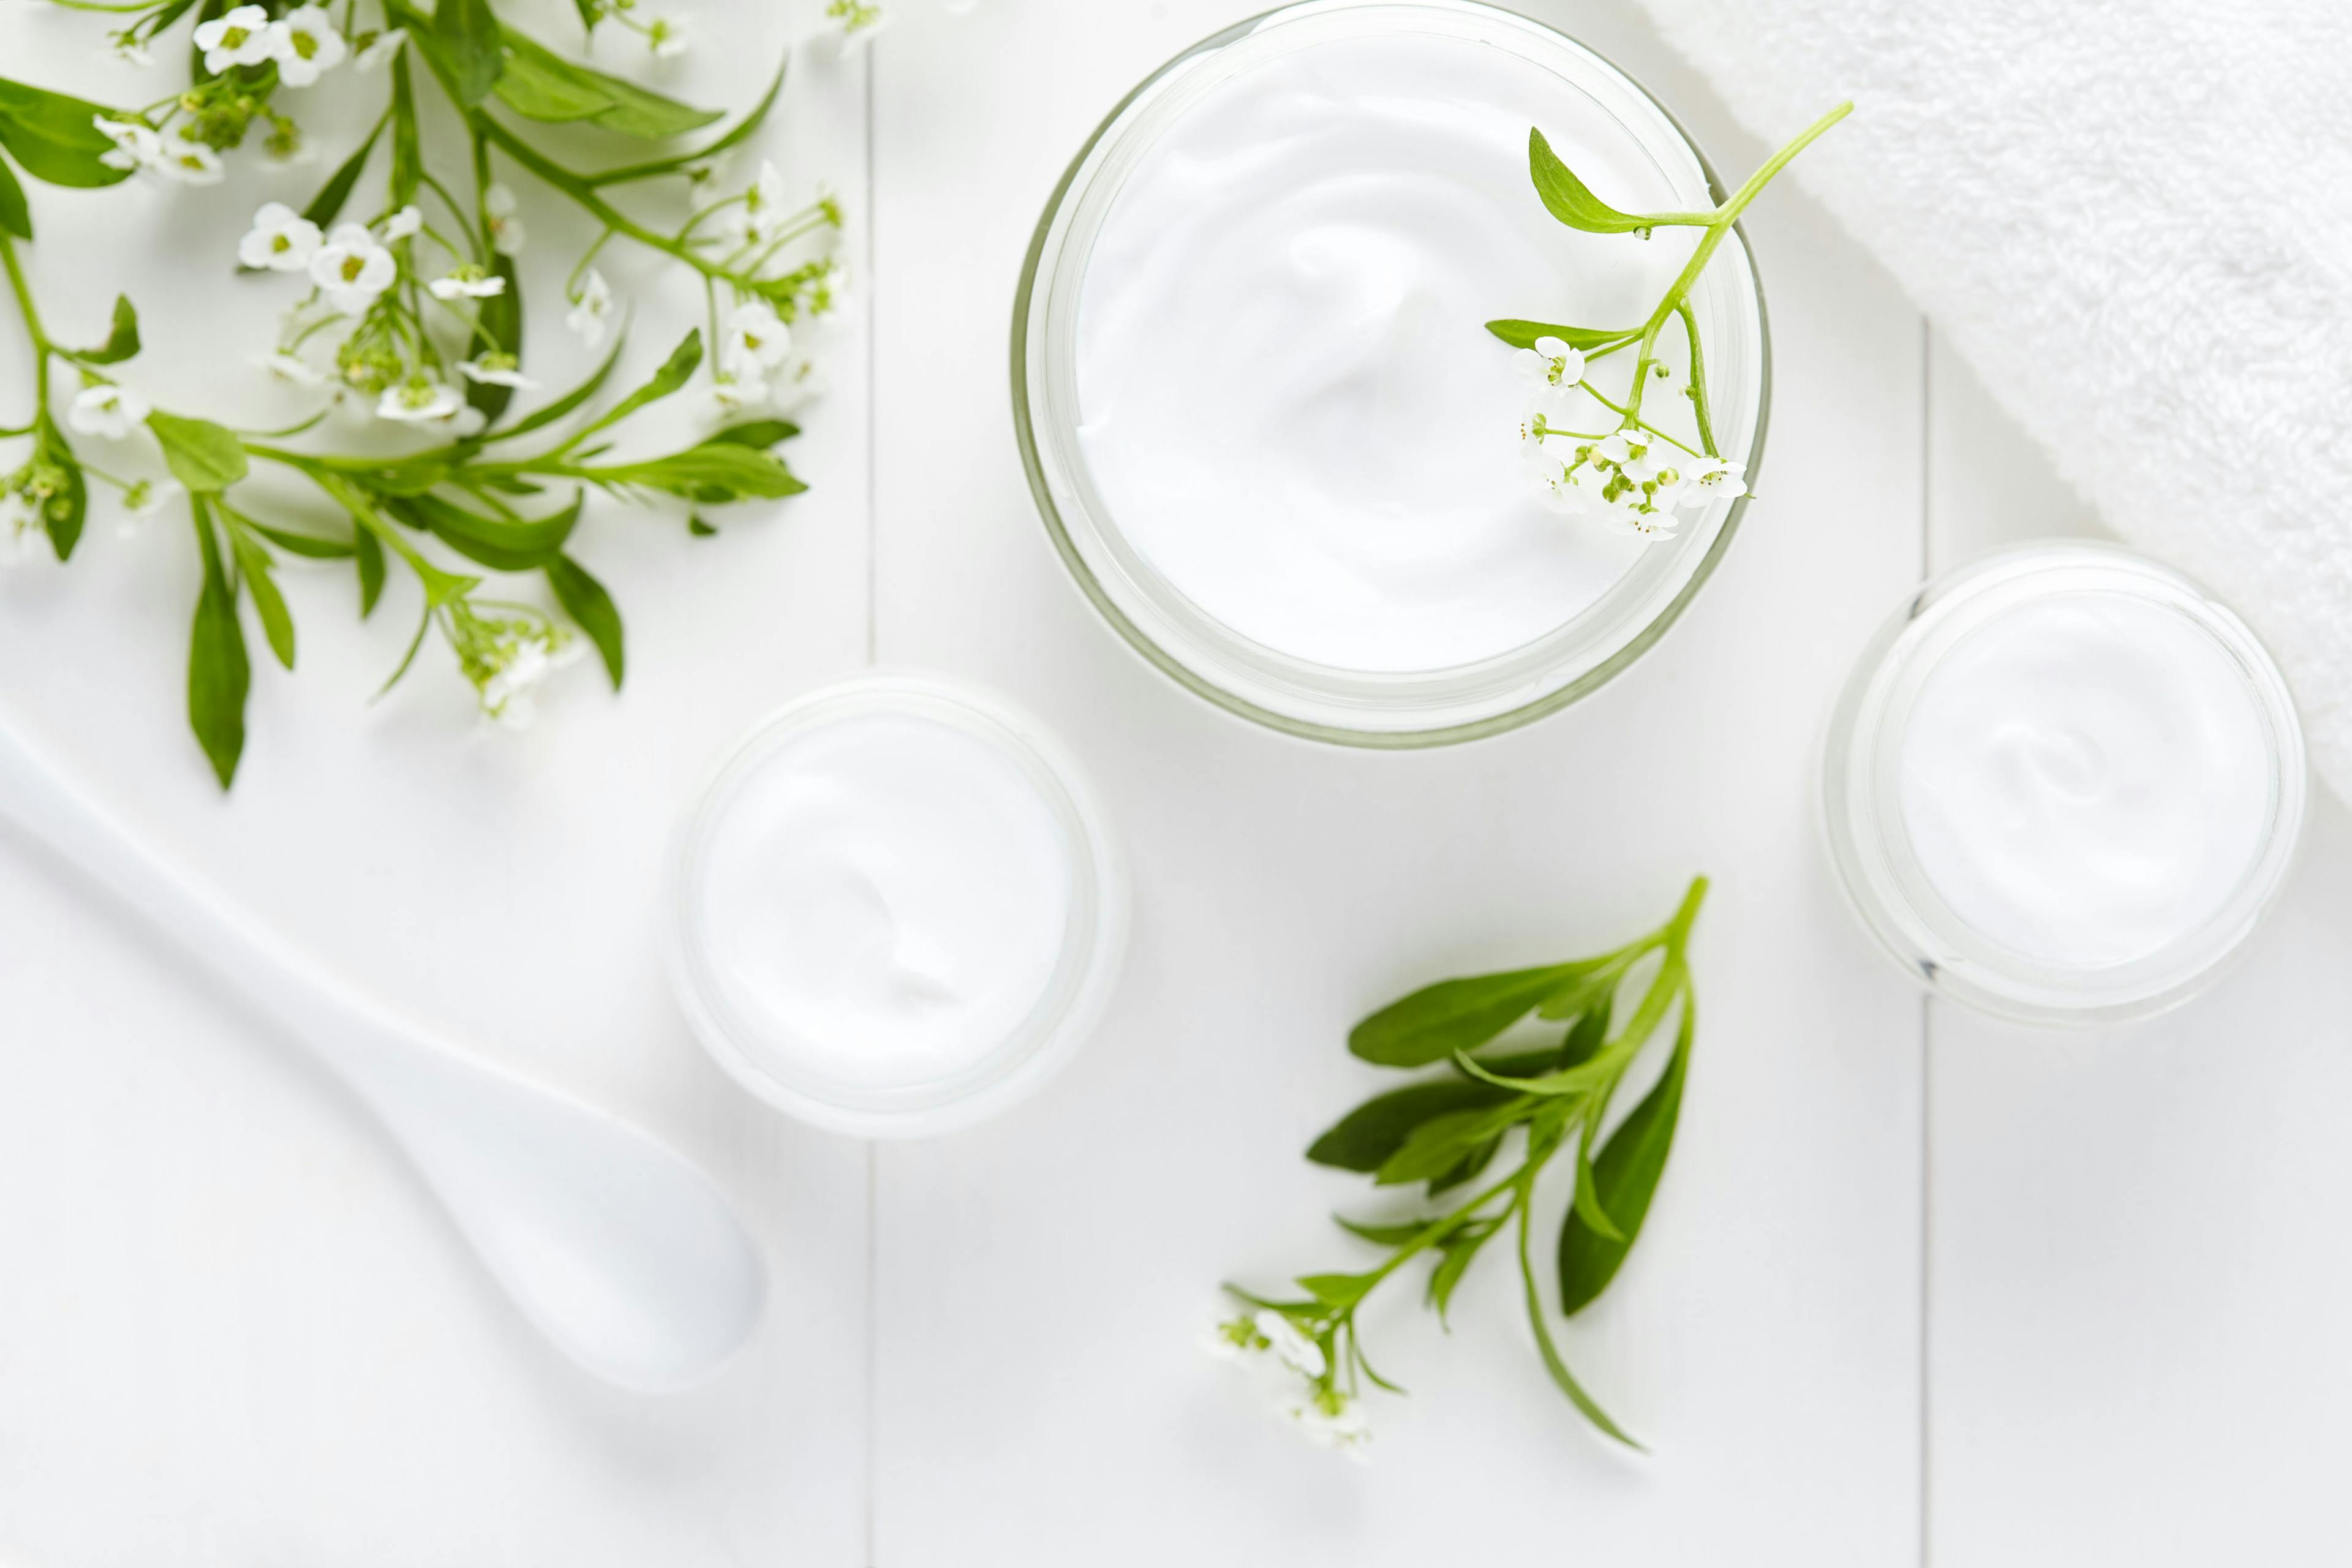 Trends in Clean, Sustainable, and Green Skin Care, Cosmetics